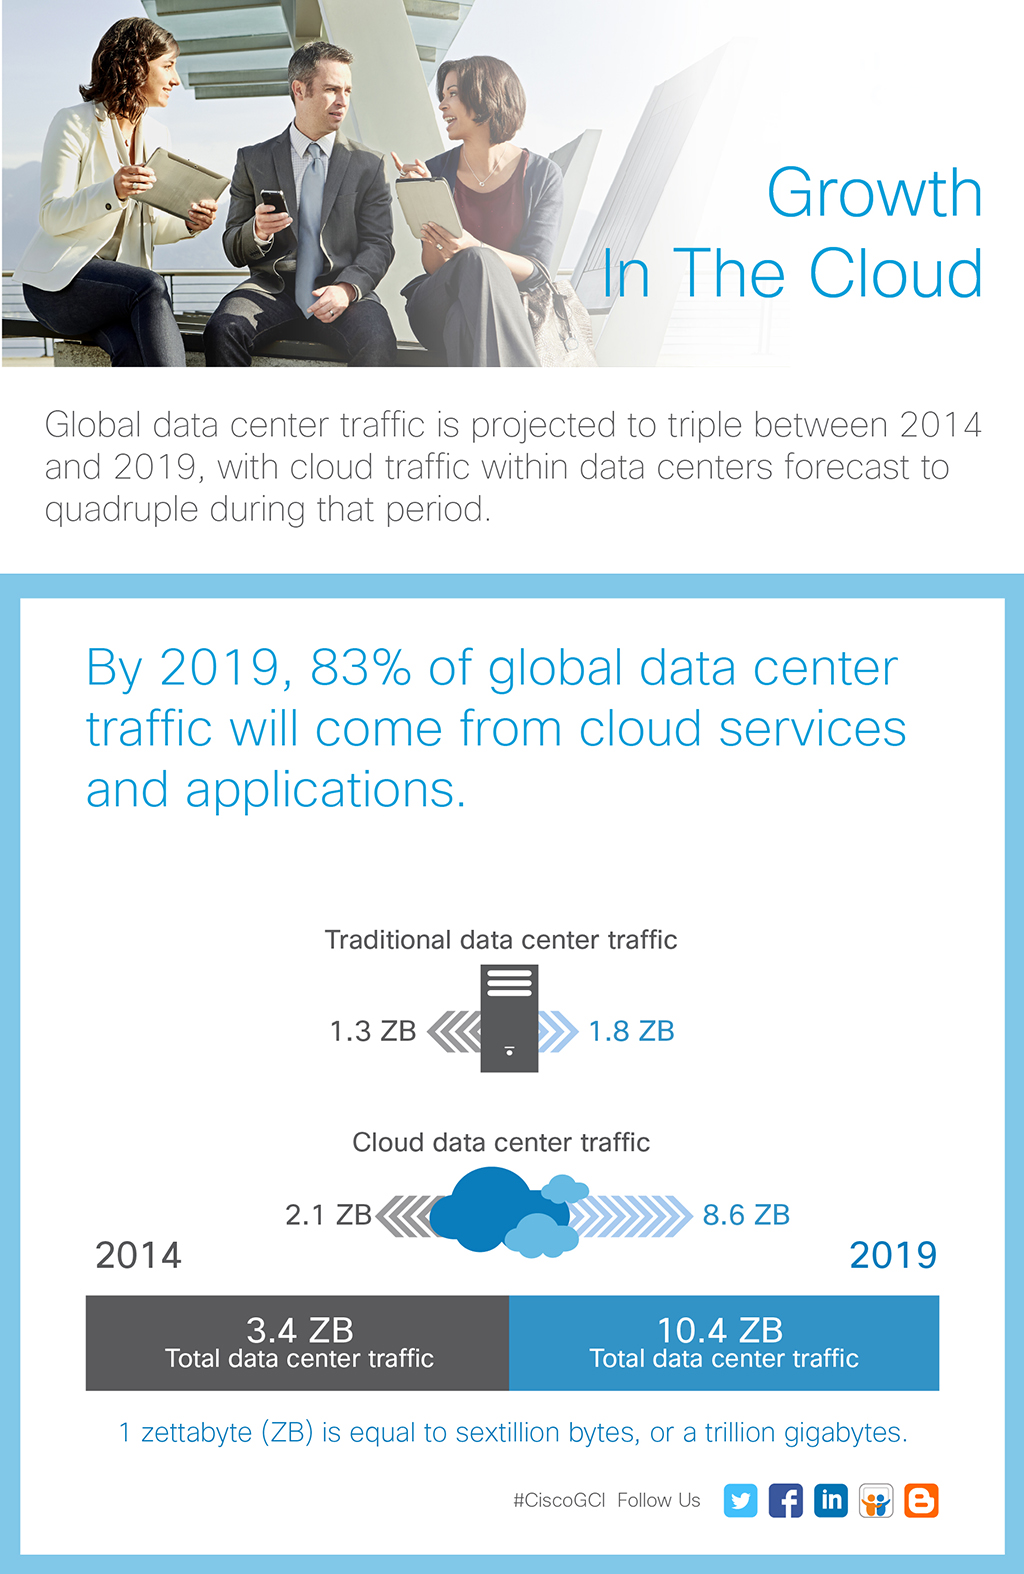 growth_cloud_infographic